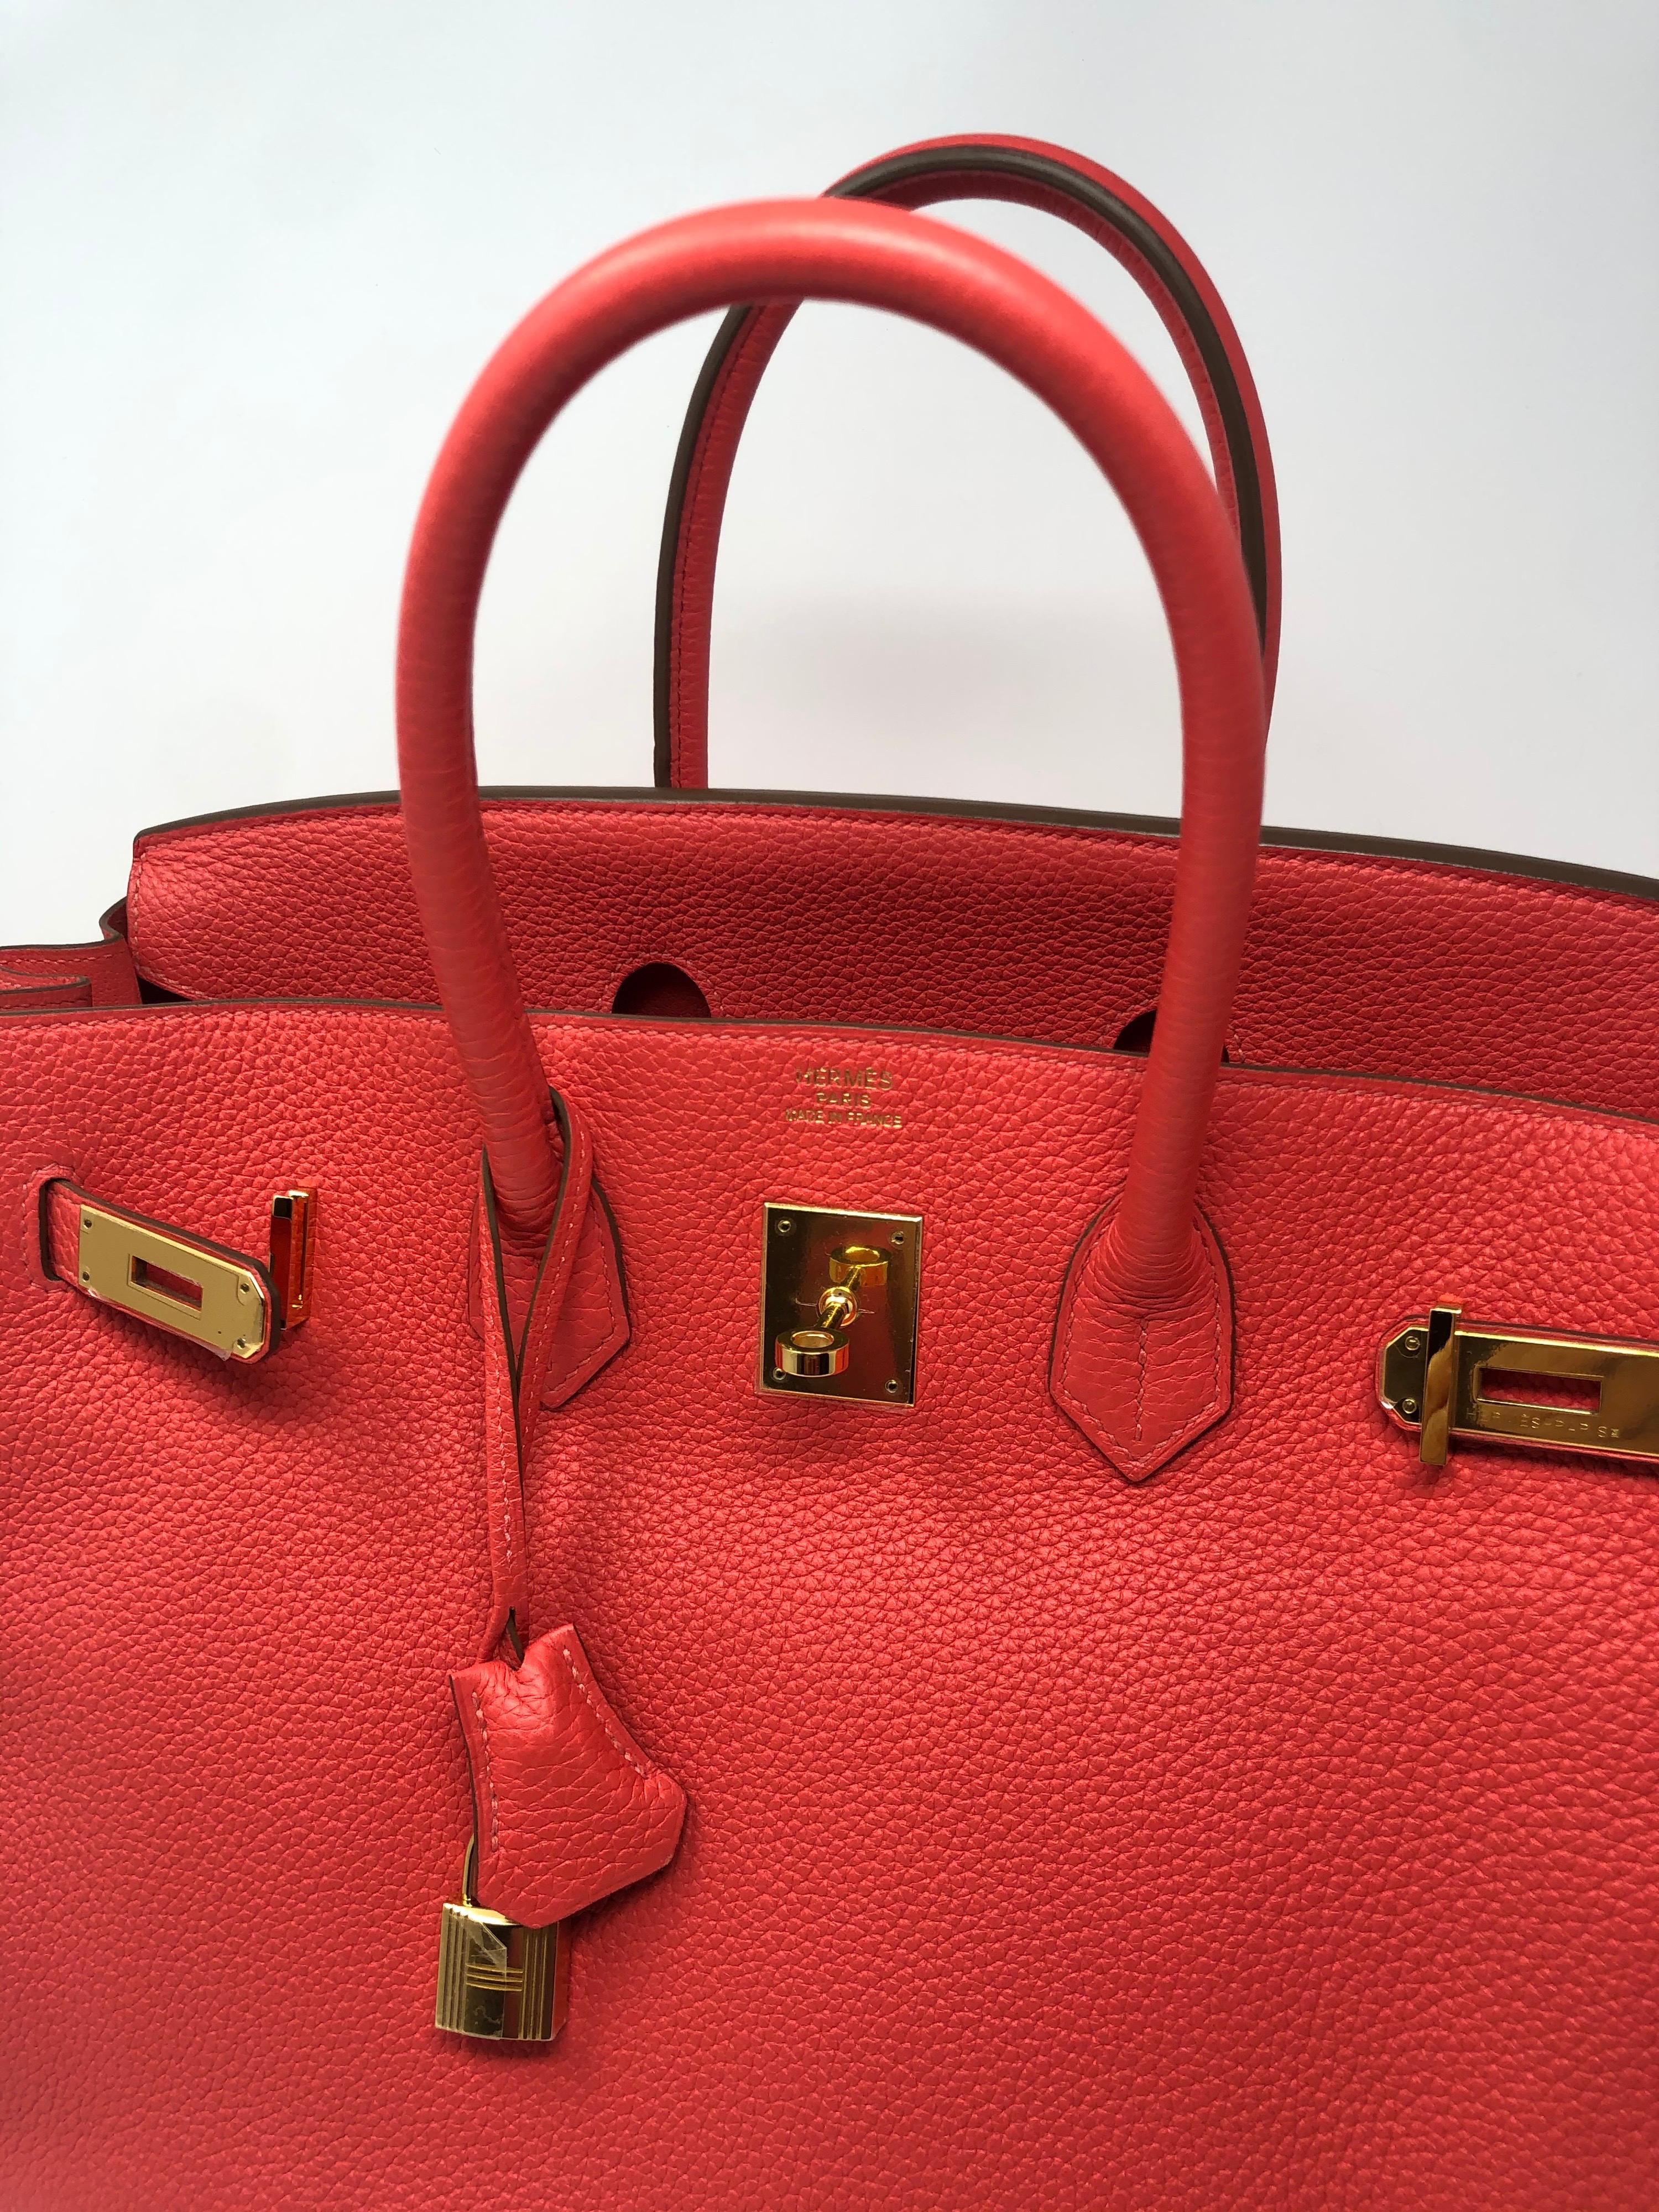 Hermes Birkin Rouge Pivone 35. Gold hardware. Mint like brand new condition. Plastic still on hardware. R stamp from 2014. One of the newest shades of red from Hermes. It is a rosy pink/ red salmon color. Vibrant and beautiful. Don't miss out on